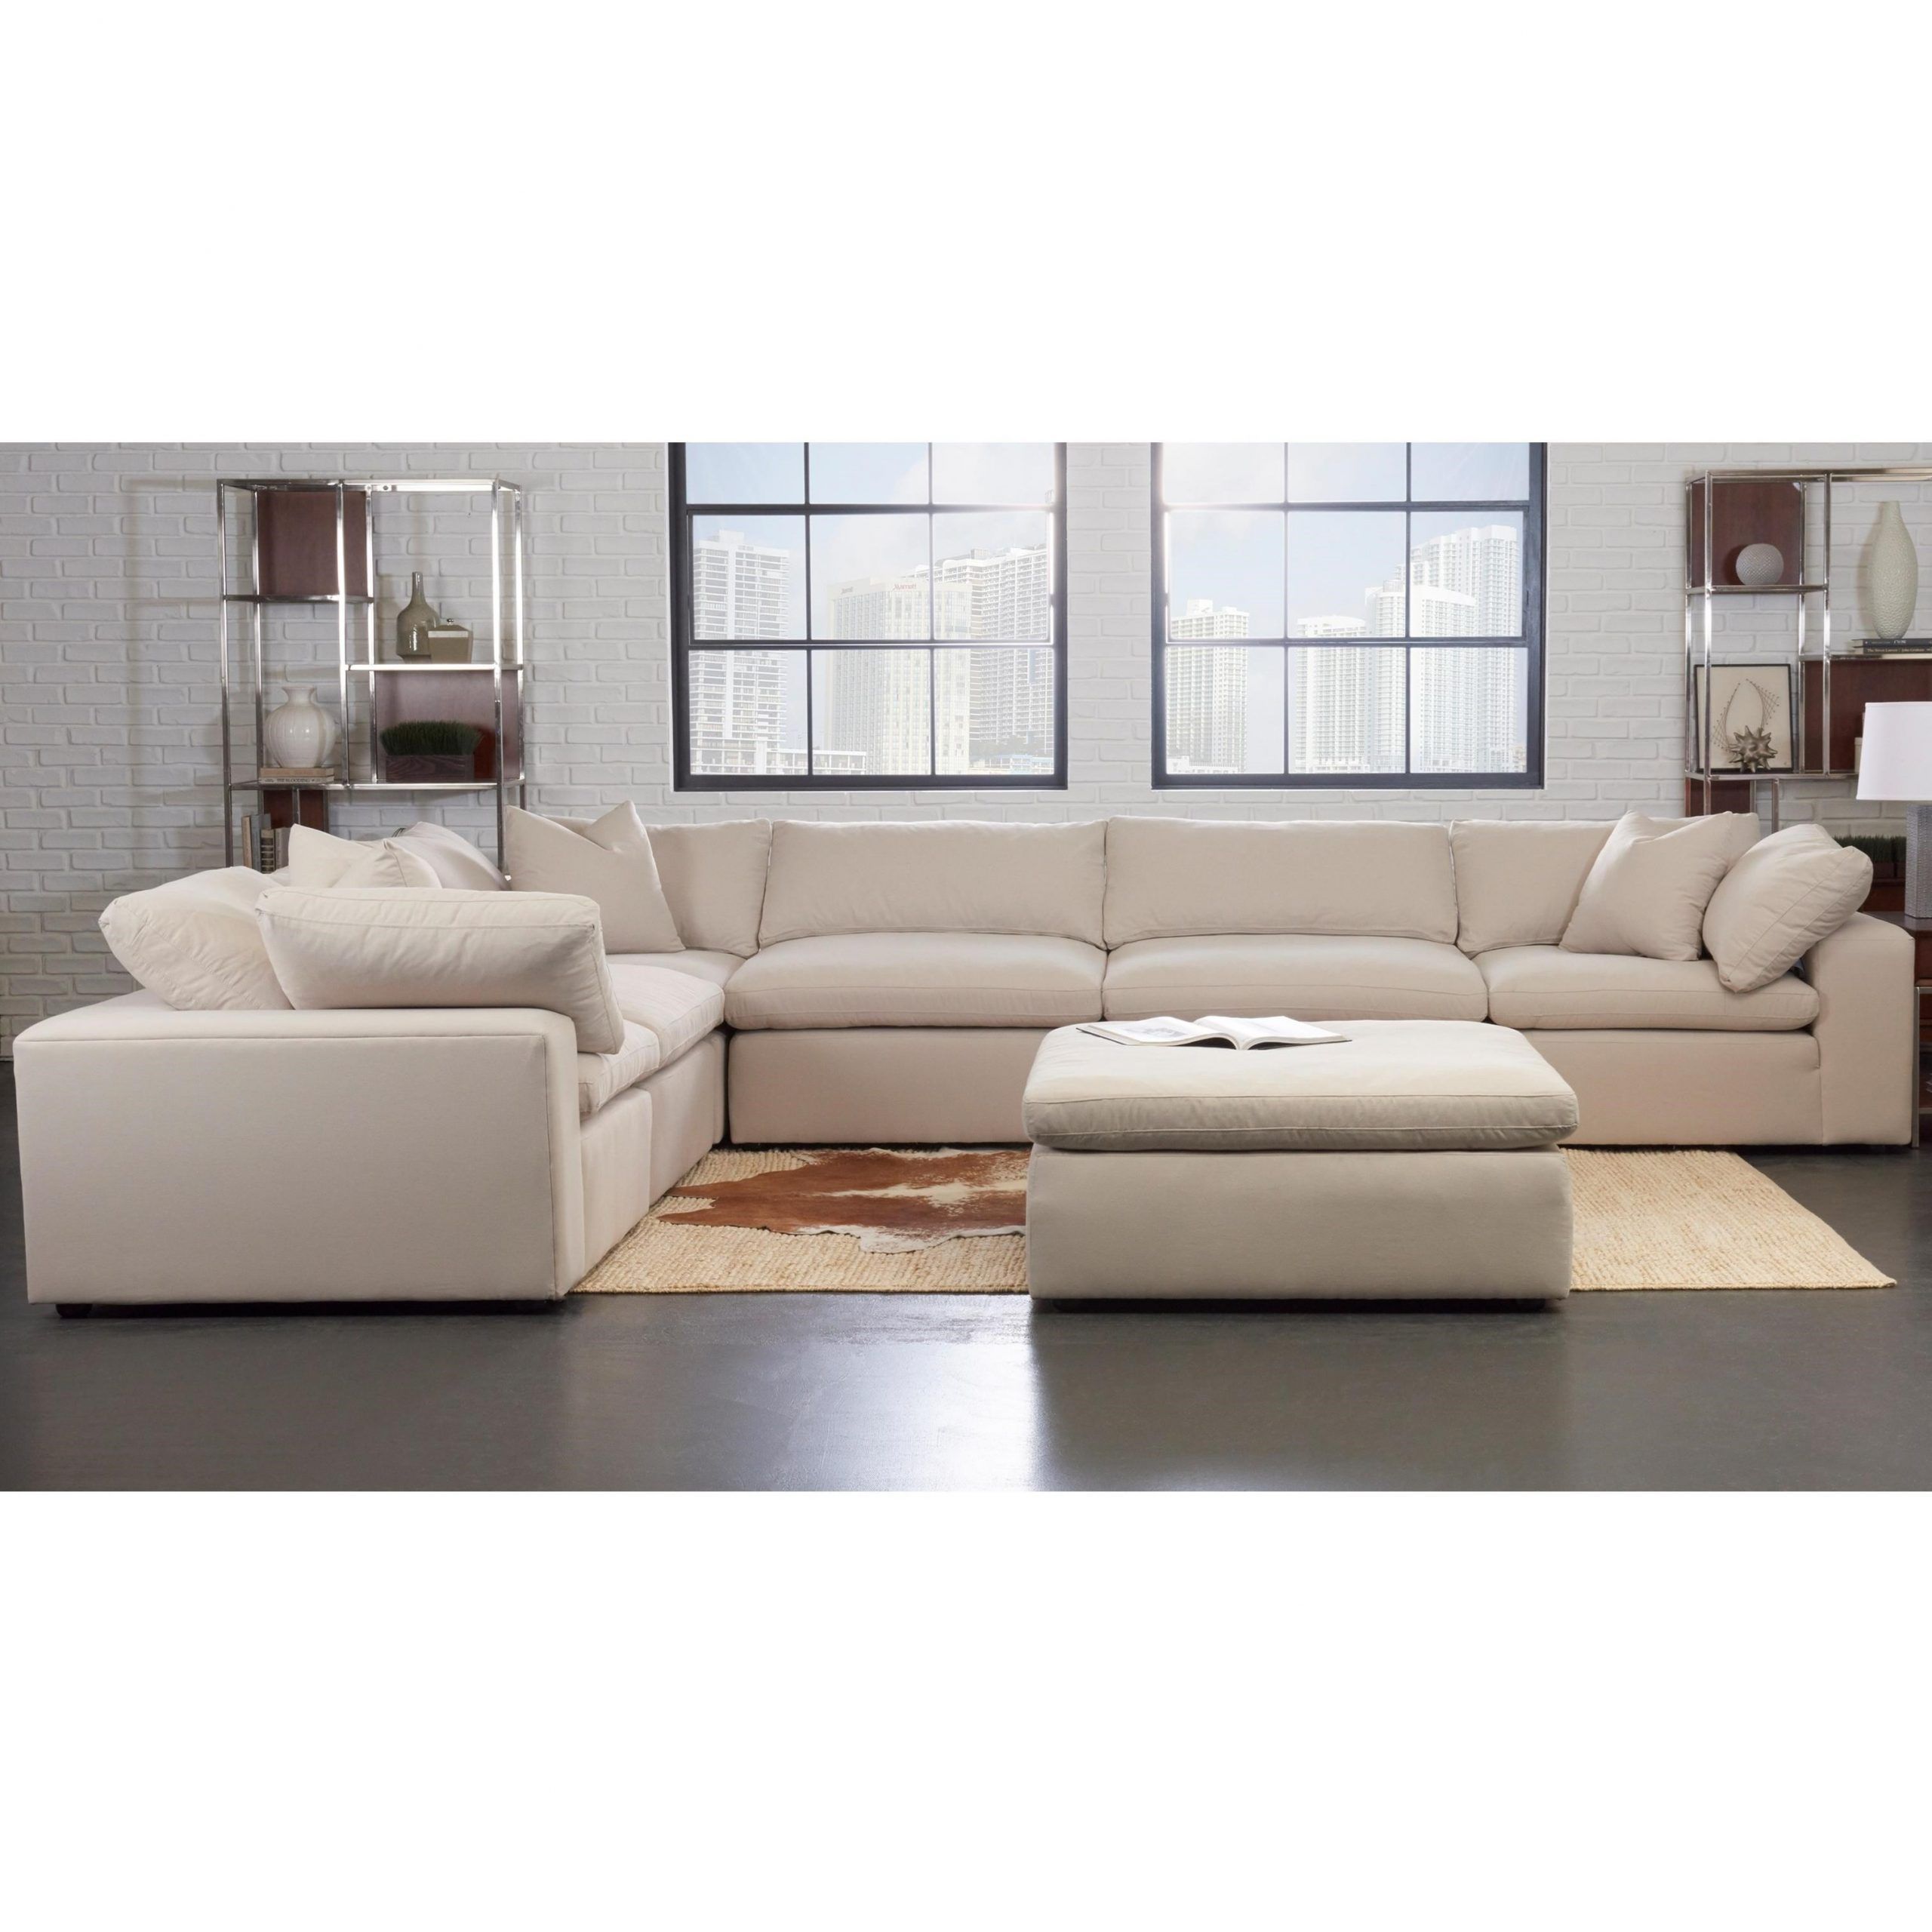 Klaussner Monterey Contemporary 6 Pc Modular Sectional Inside Paul Modular Sectional Sofas Blue (Photo 10 of 15)